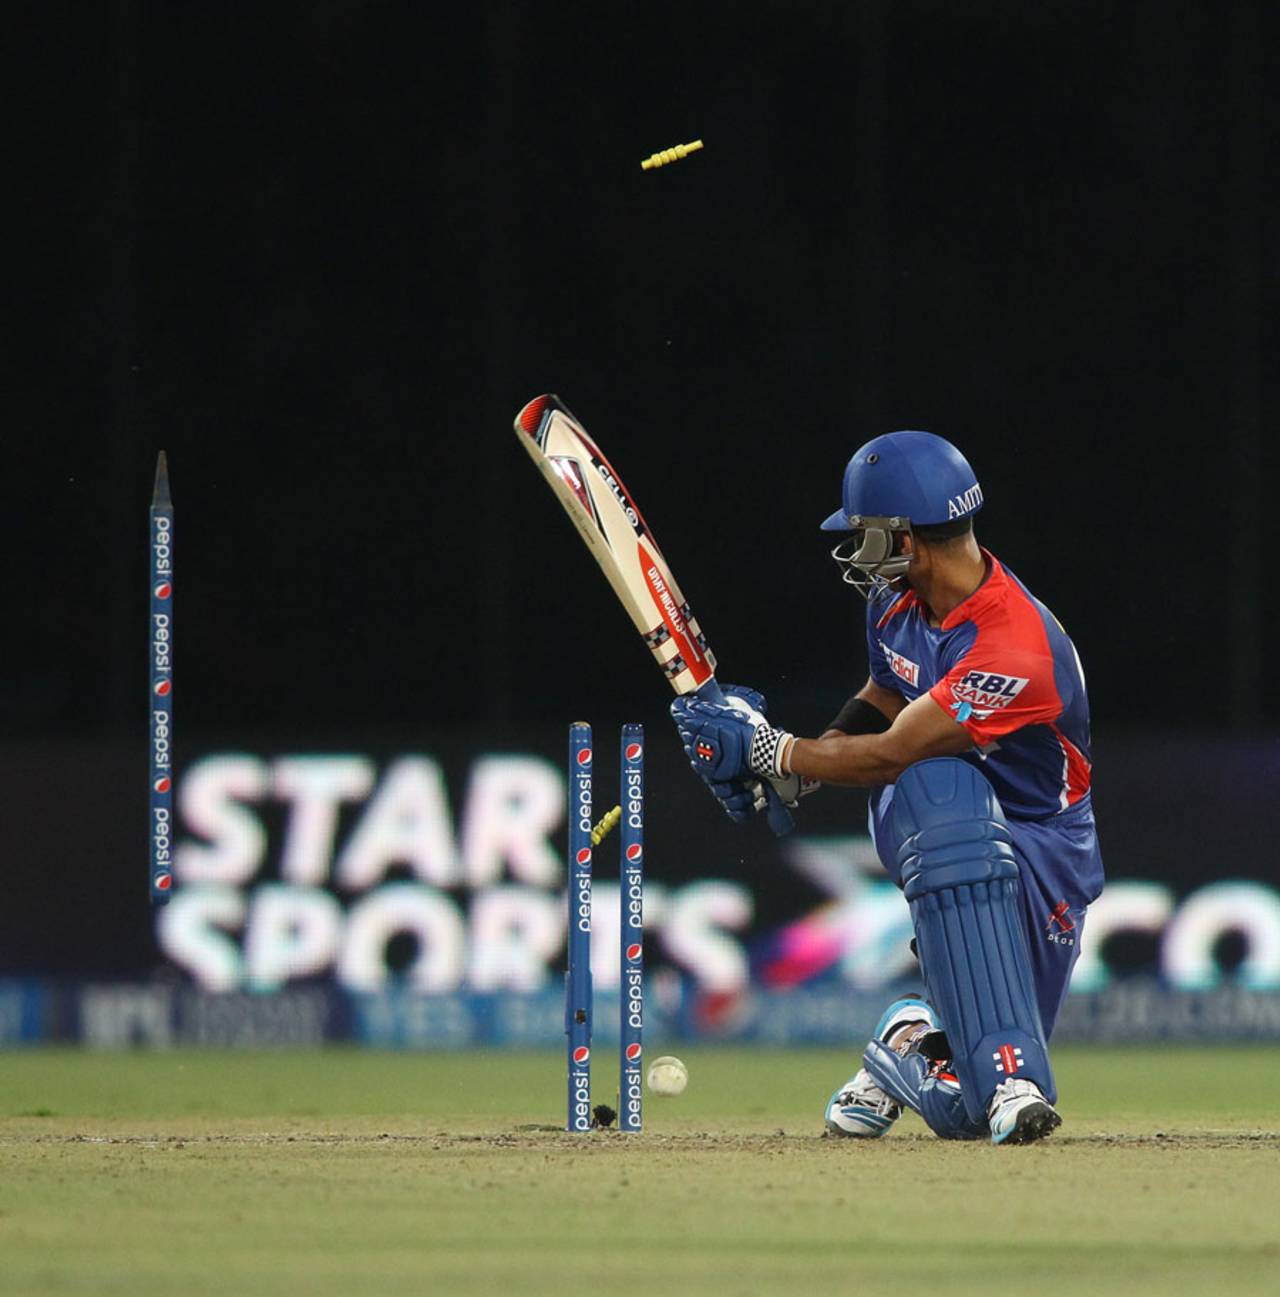 DELHI DAREDEVILS, 2014-15 <br> <b>Current streak</b>: 11 losses (and counting), the joint highest <br> <b>Flops </b>: Several contenders, but a good case can be made for their captain and star batsman last year, Kevin Pietersen, who managed just one fifty from 11 innings<br> <b>Closest they came to ending the rut</b>: Had Albie Morkel's slog off the last ball against <a href="http://www.espncricinfo.com/ci/engine/match/829707.html" target="_blank">Chennai Super Kings</a> landed six feet further, Daredevils would have pulled off one of their most memorable wins&nbsp;&nbsp;&bull;&nbsp;&nbsp;BCCI